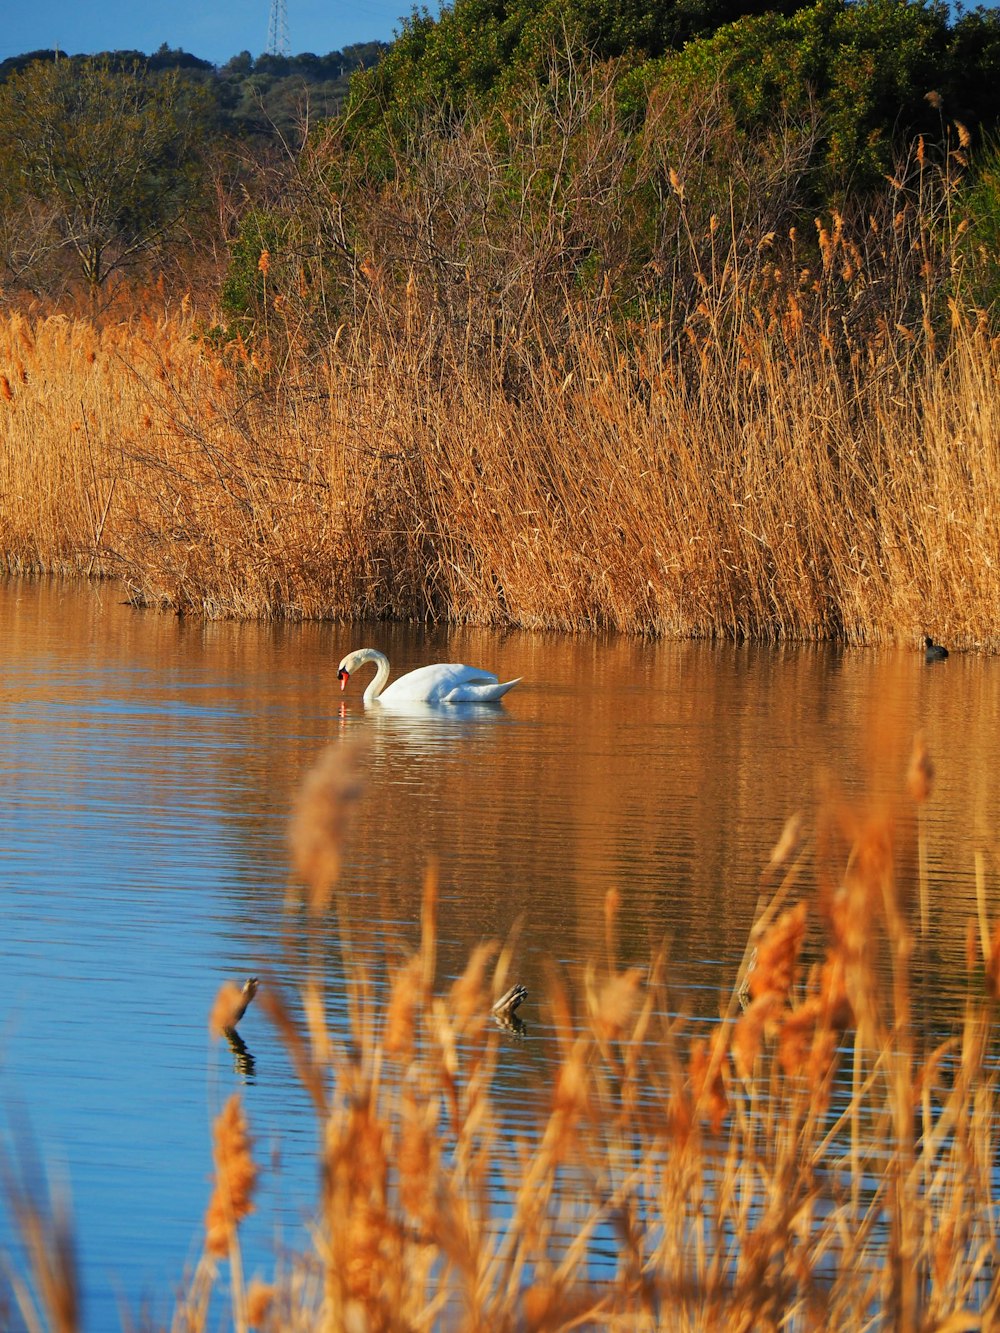 a white swan swimming in a lake surrounded by tall grass